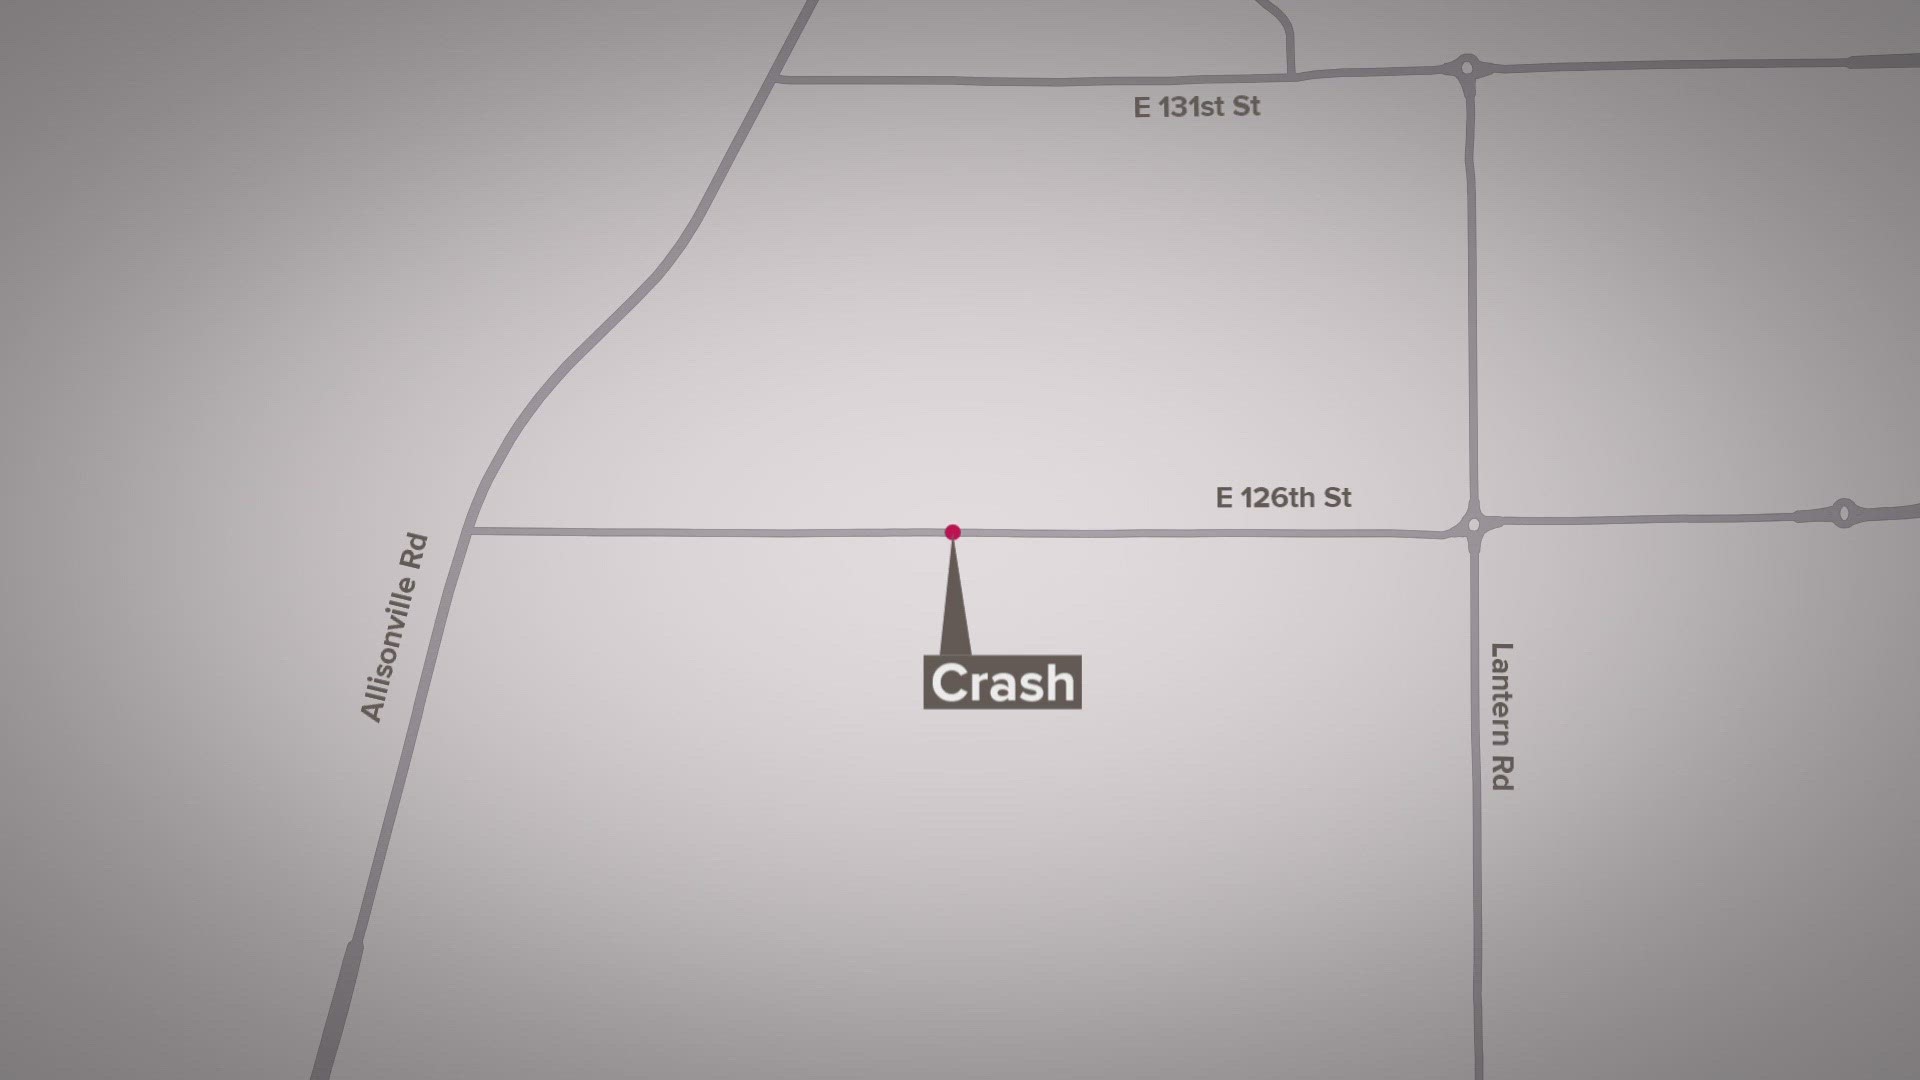 66-year-old Richard Wentzel was killed when his car was hit by a truck on 126th street just east of Allisonville Road.